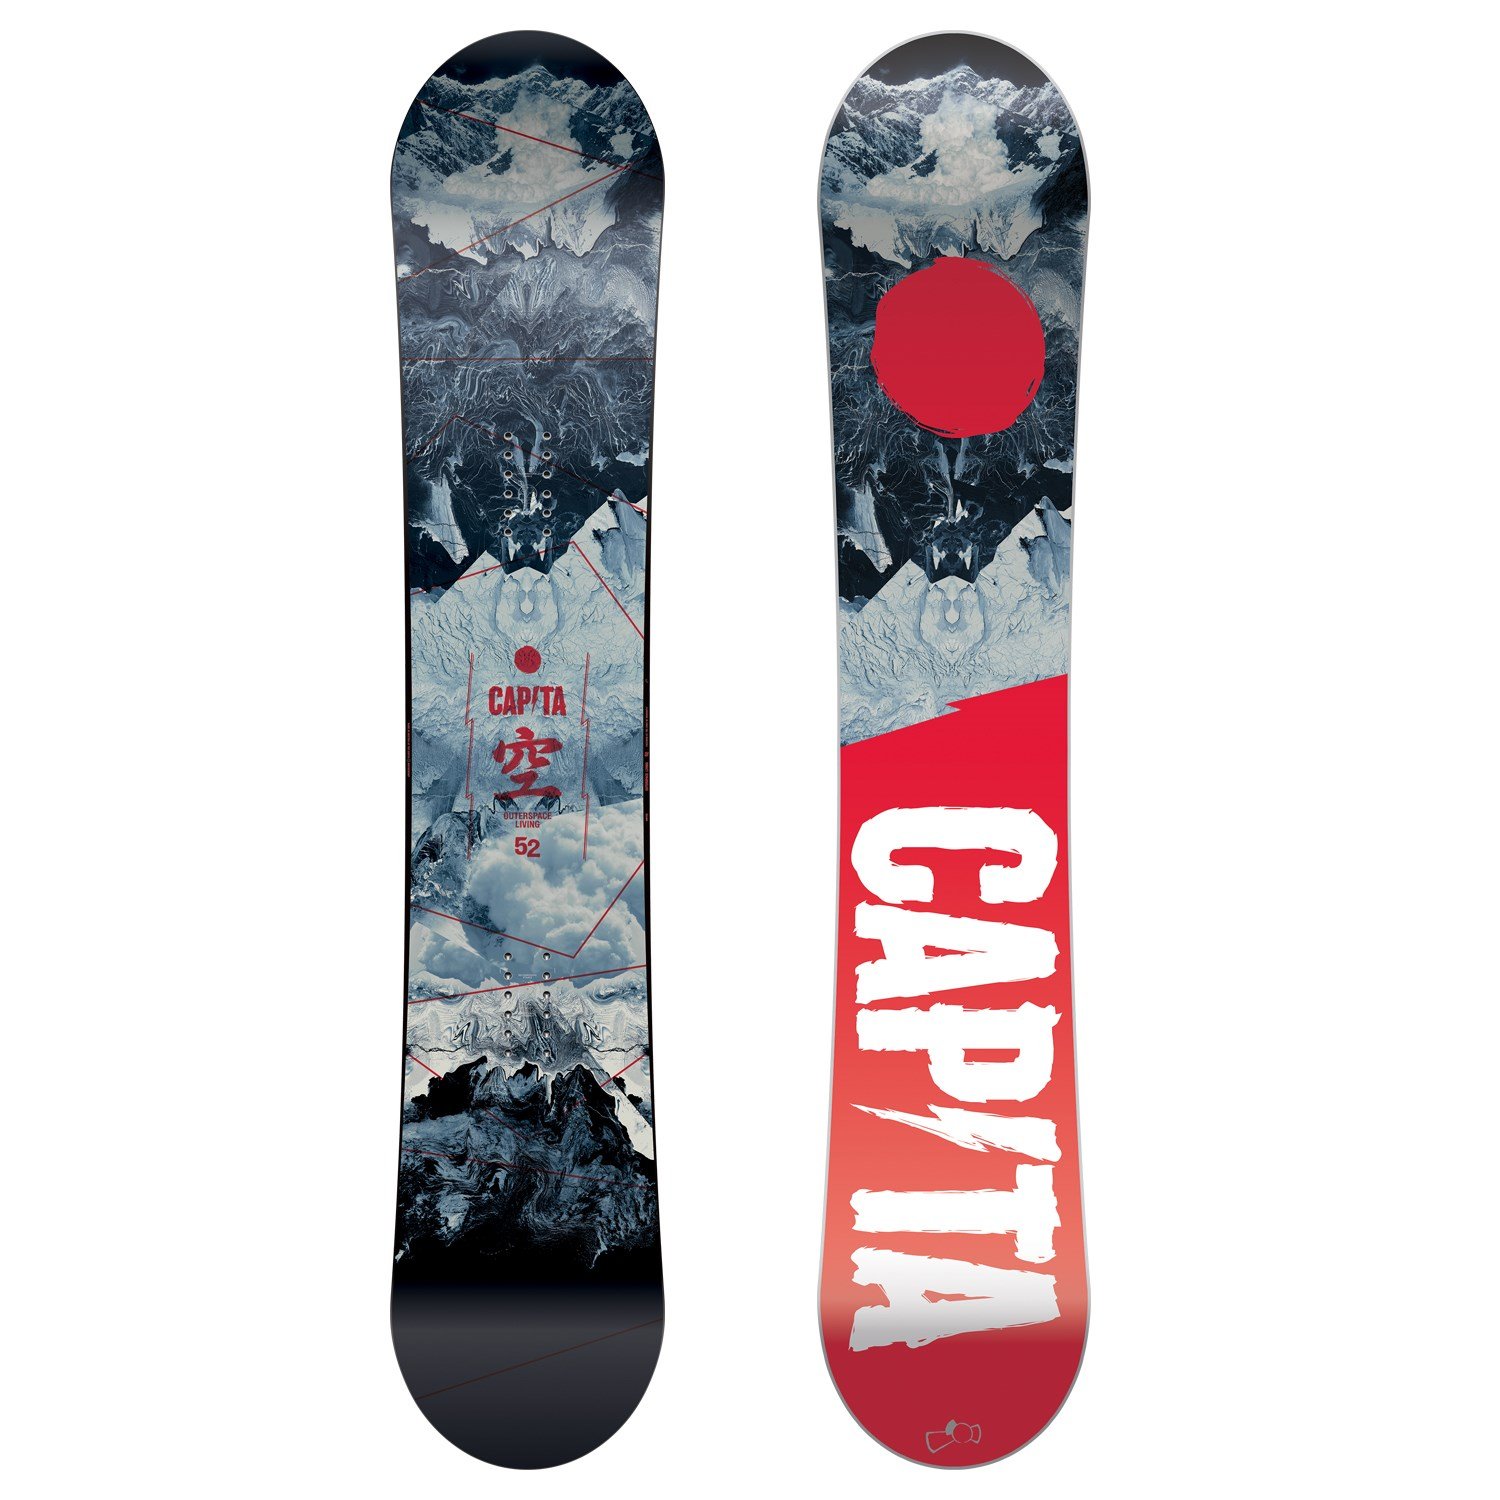 referentie badminton Albany CAPiTA Outerspace Living Snowboard 2017 | evo